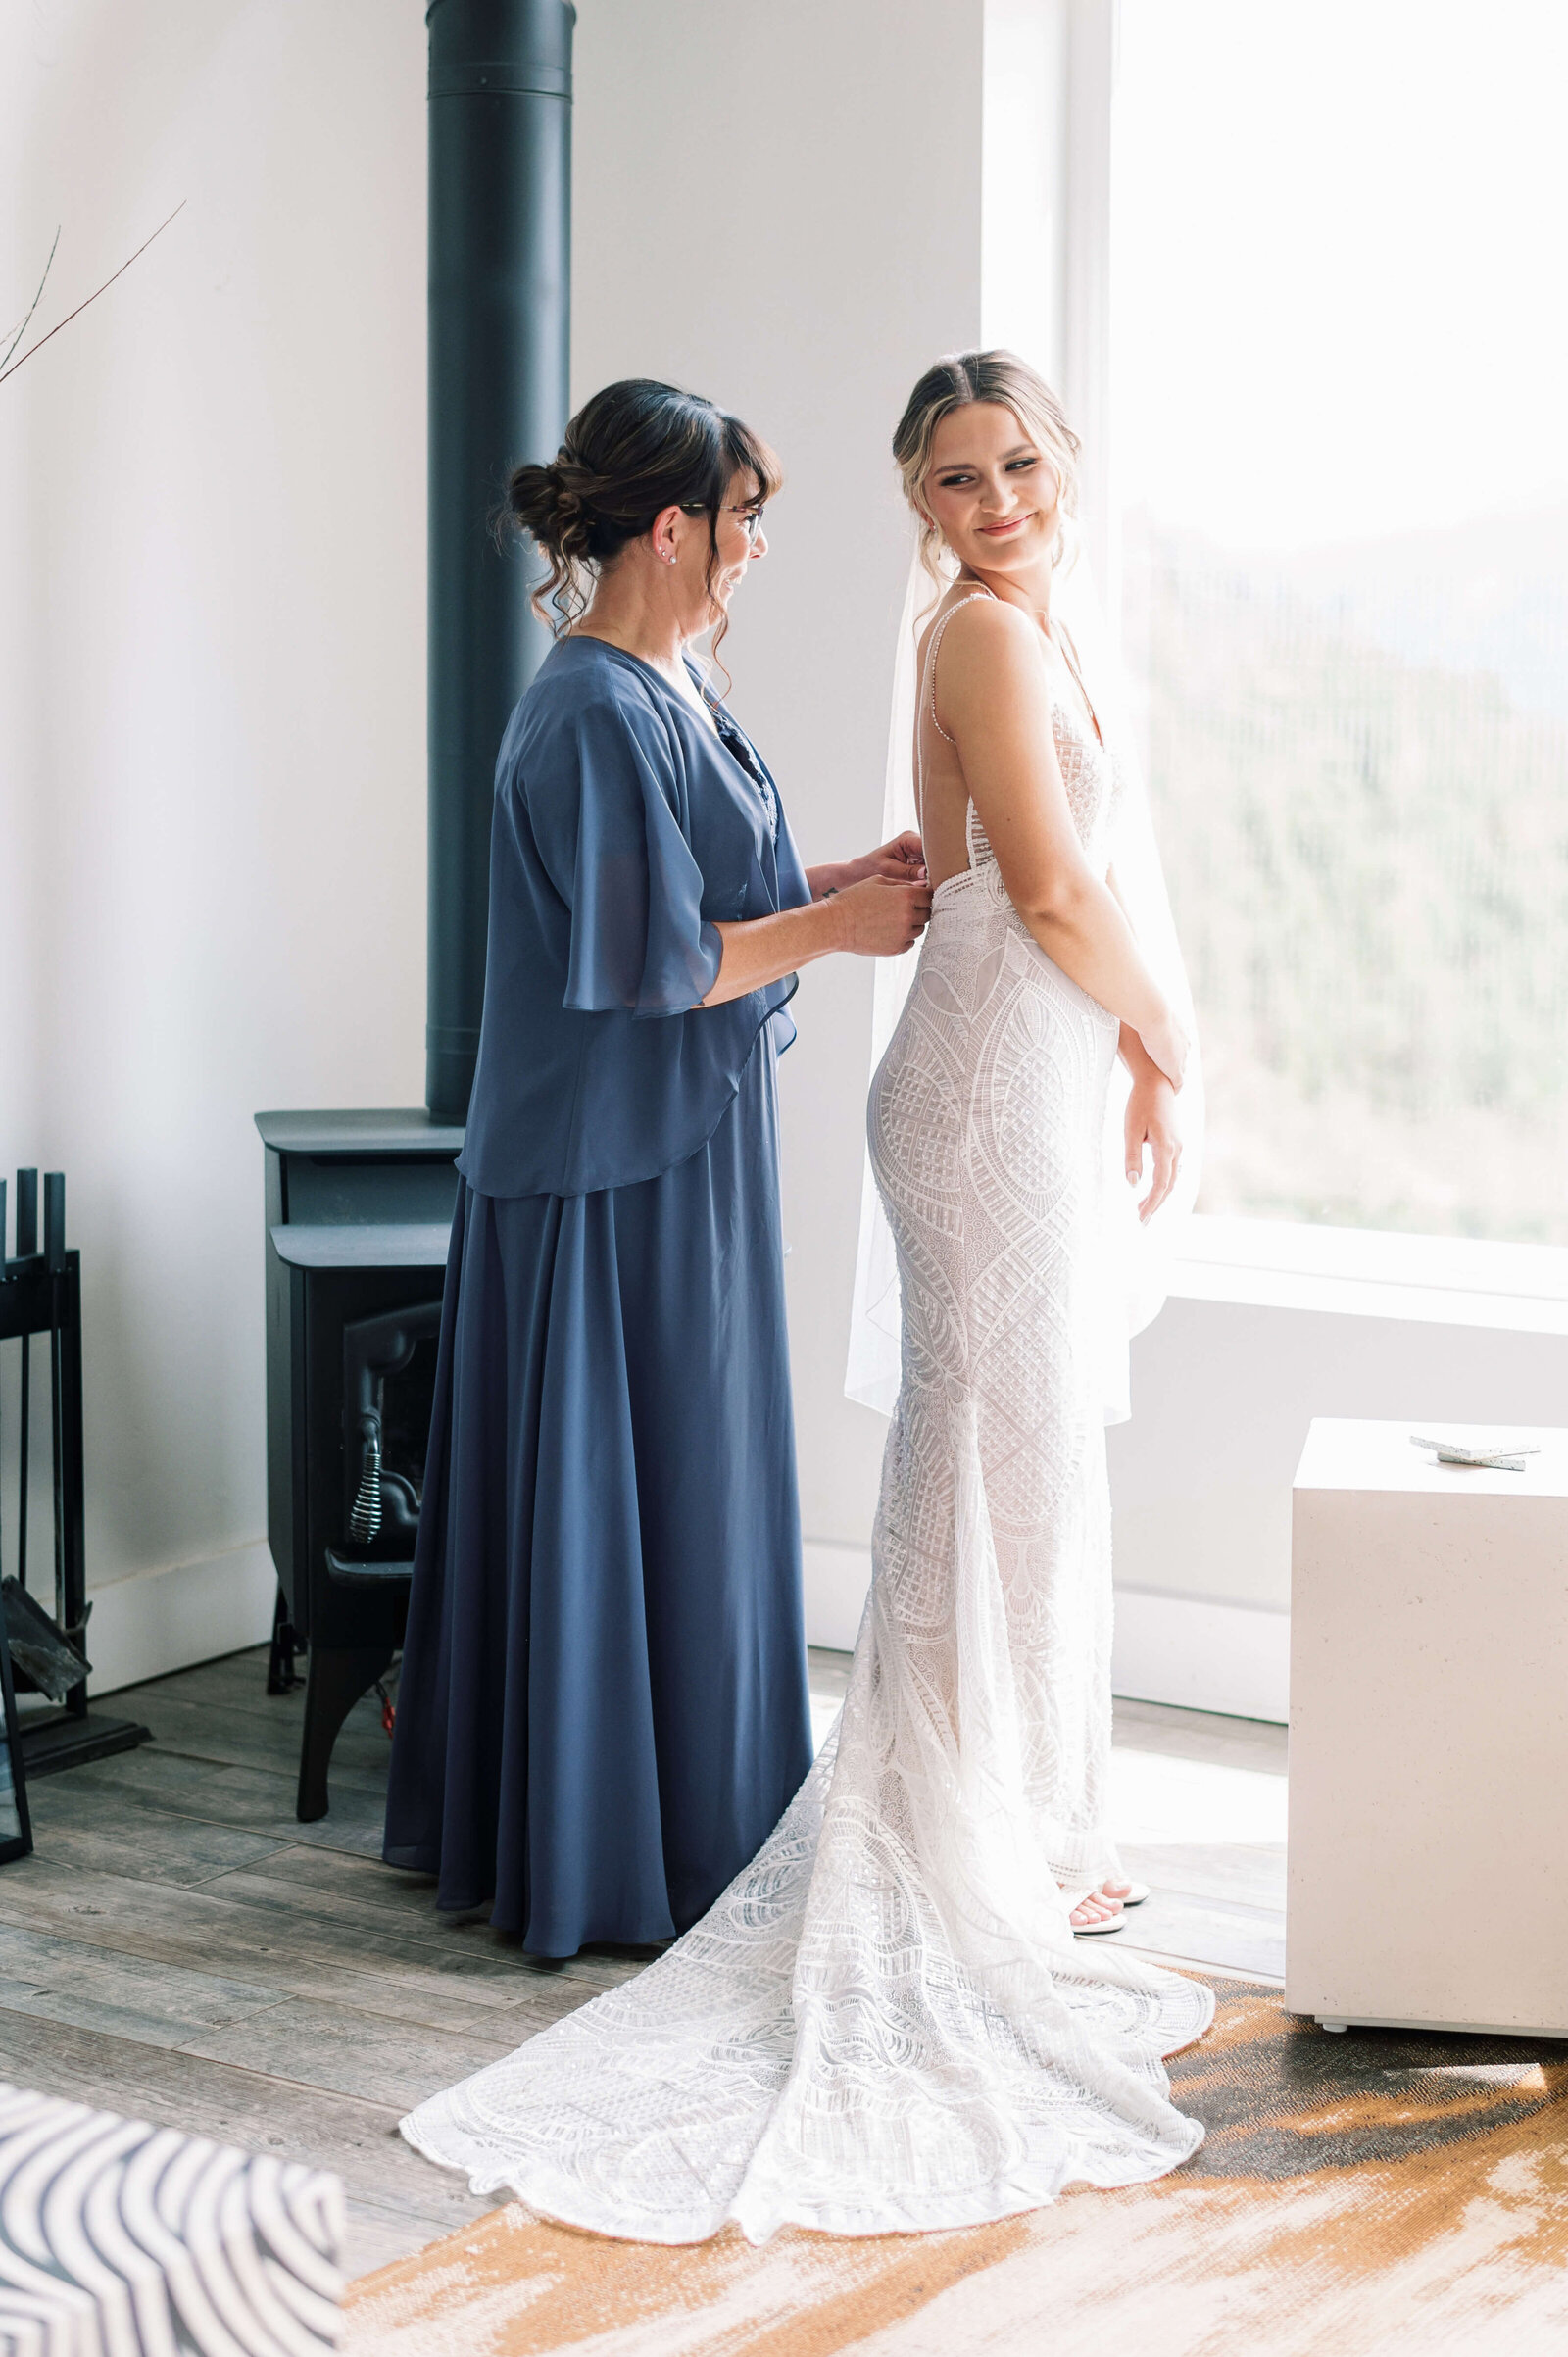 Mother of the bride, wearing a long blue dress, zips up the gown of the bride